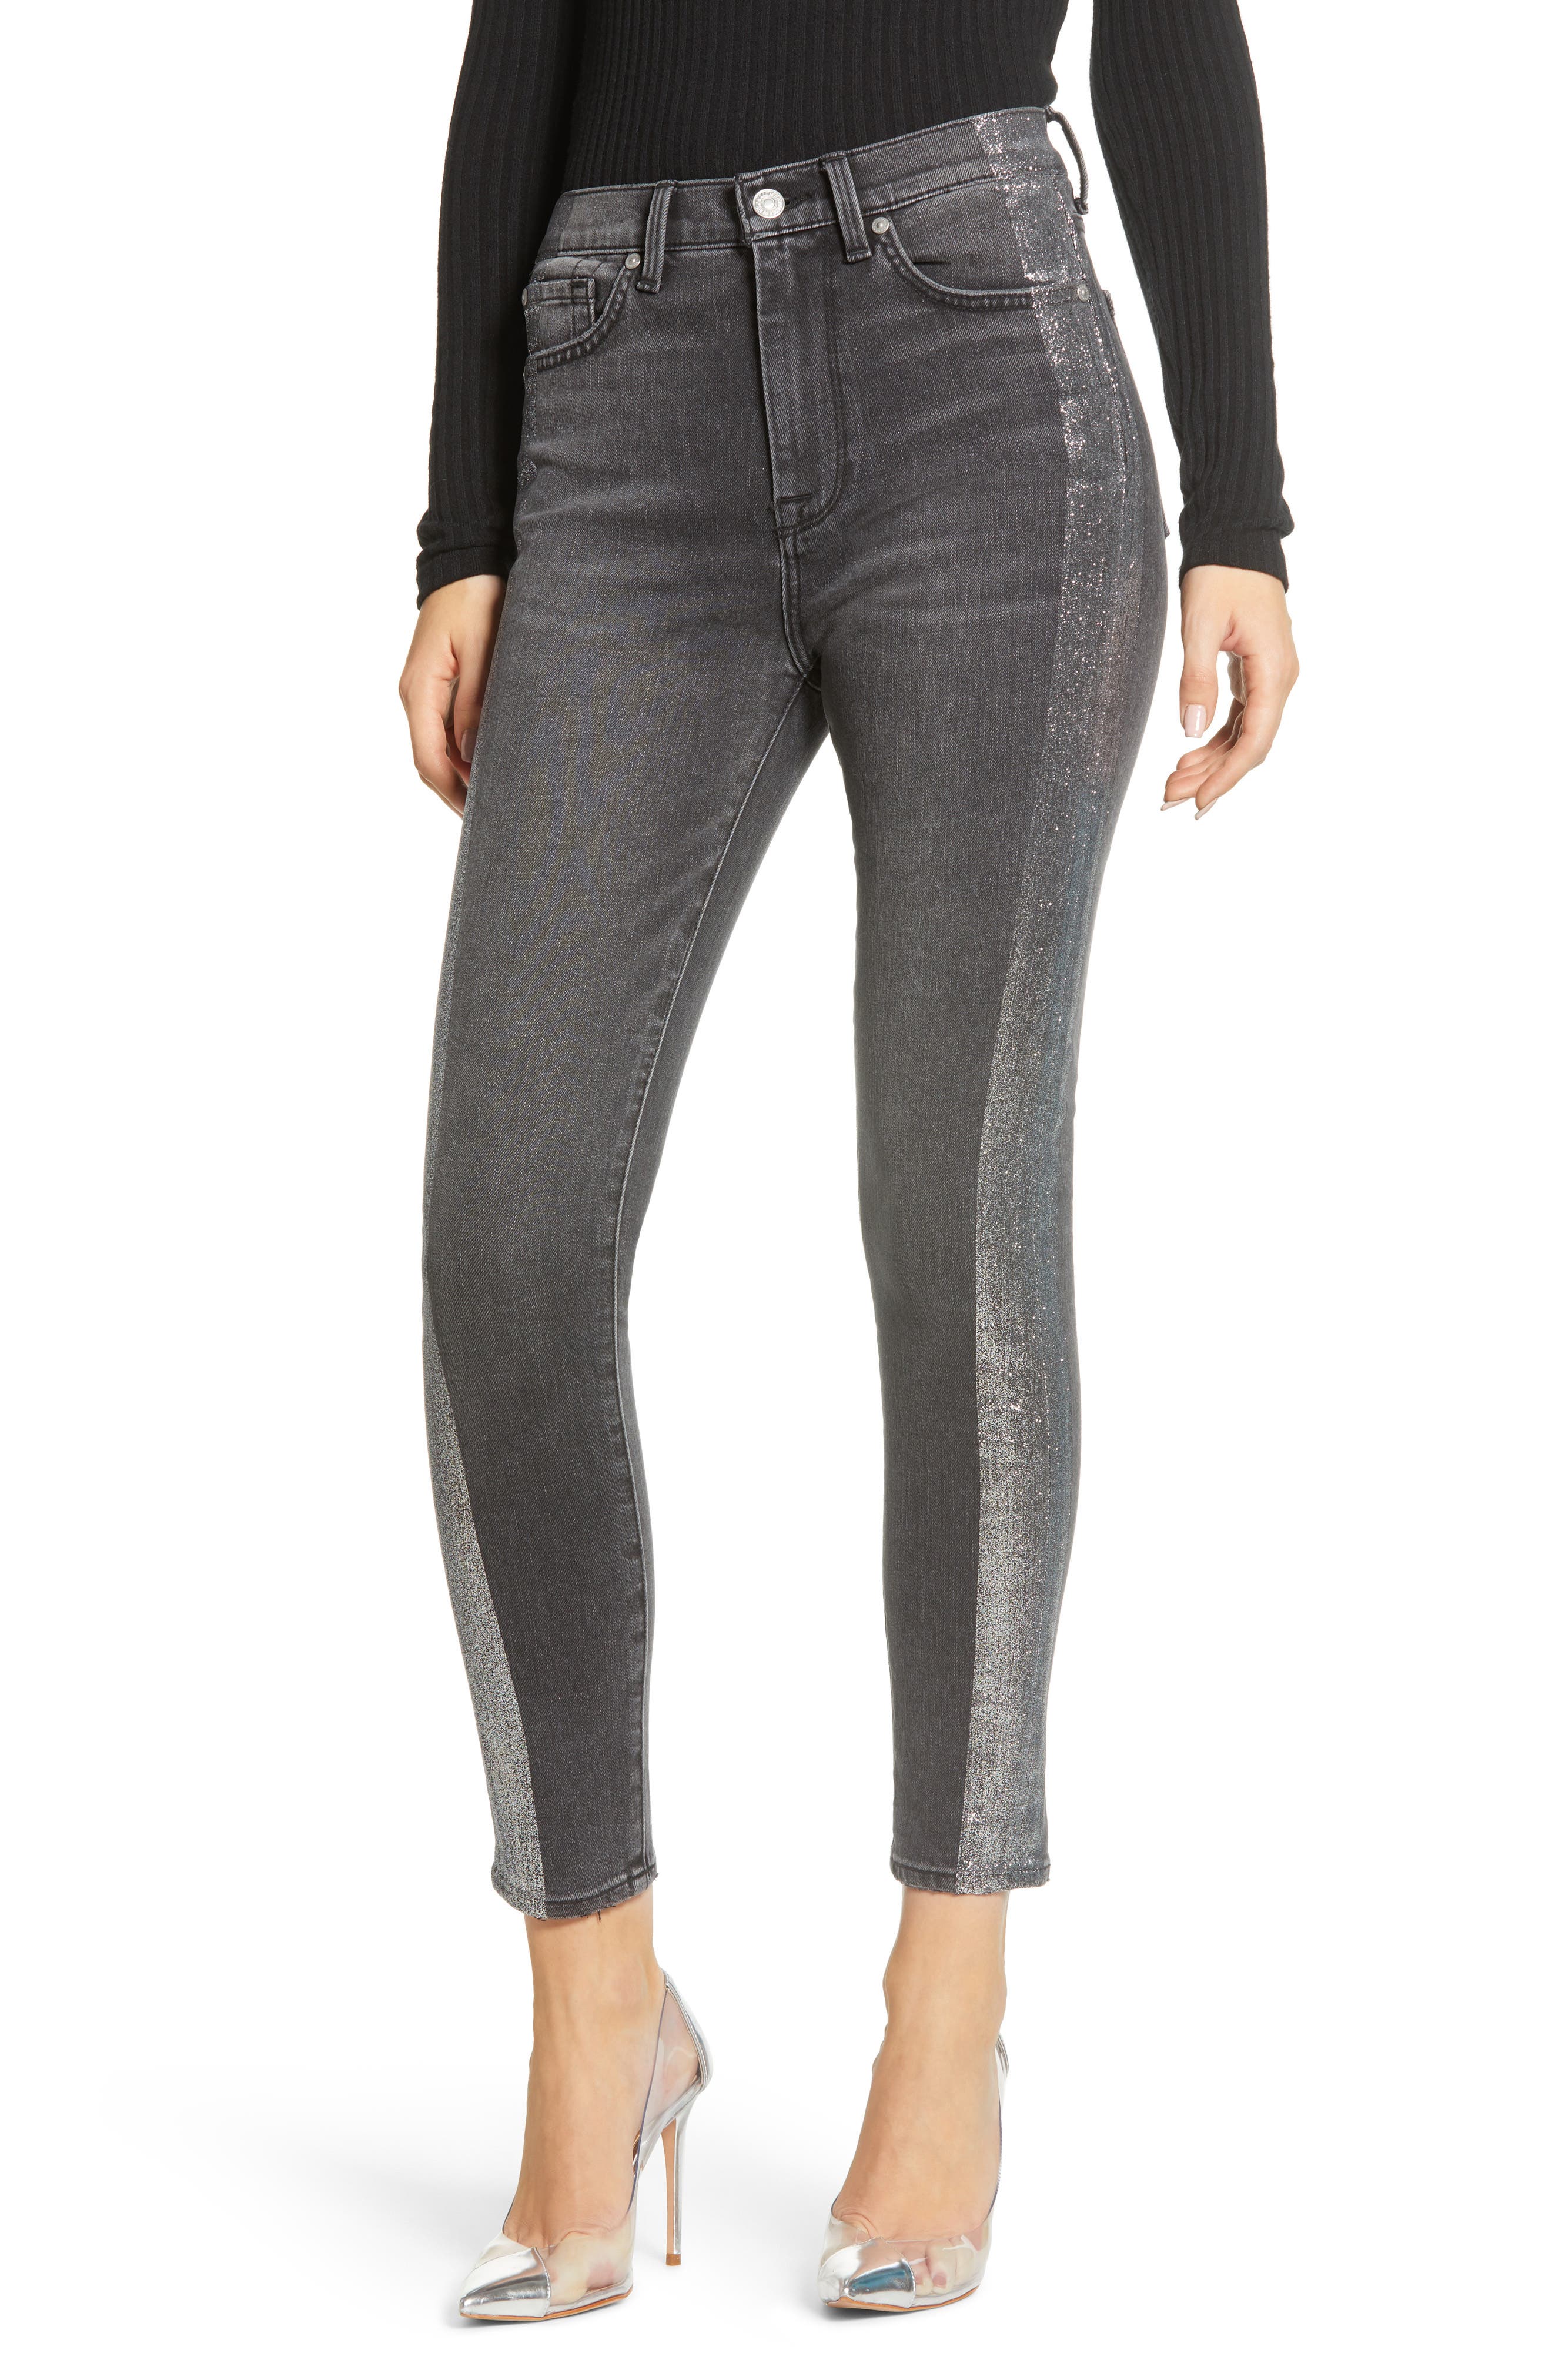 jeans with silver stripe